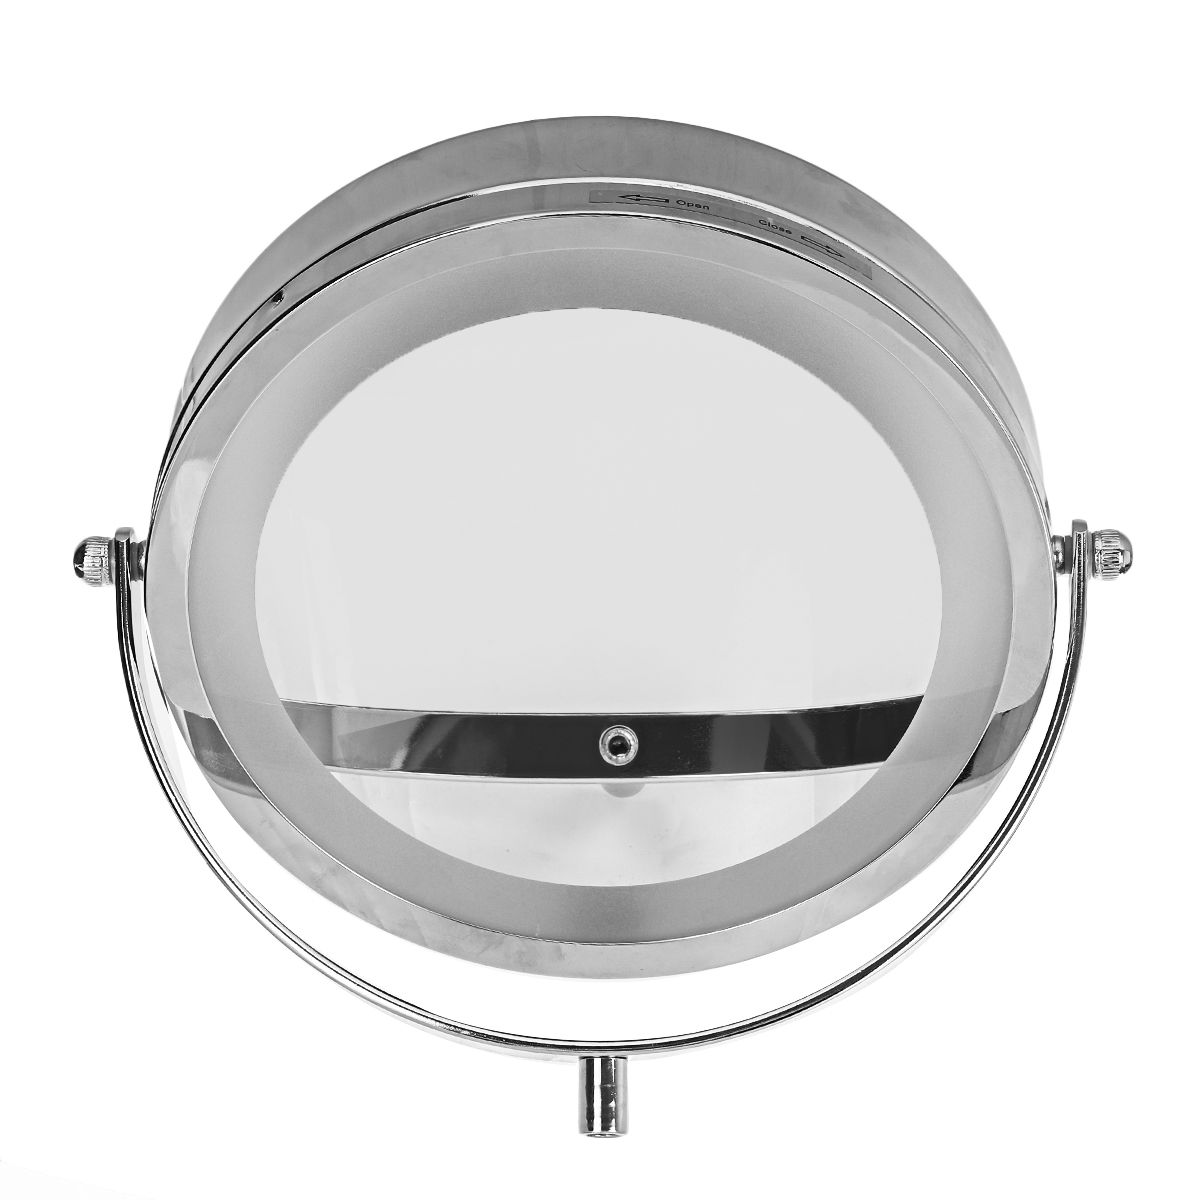 7-Inch-Folding-Telescopic-Bathroom-Makeup-Mirrors-With-LED-Wall-Mounted-3x-Magnifying-1676585